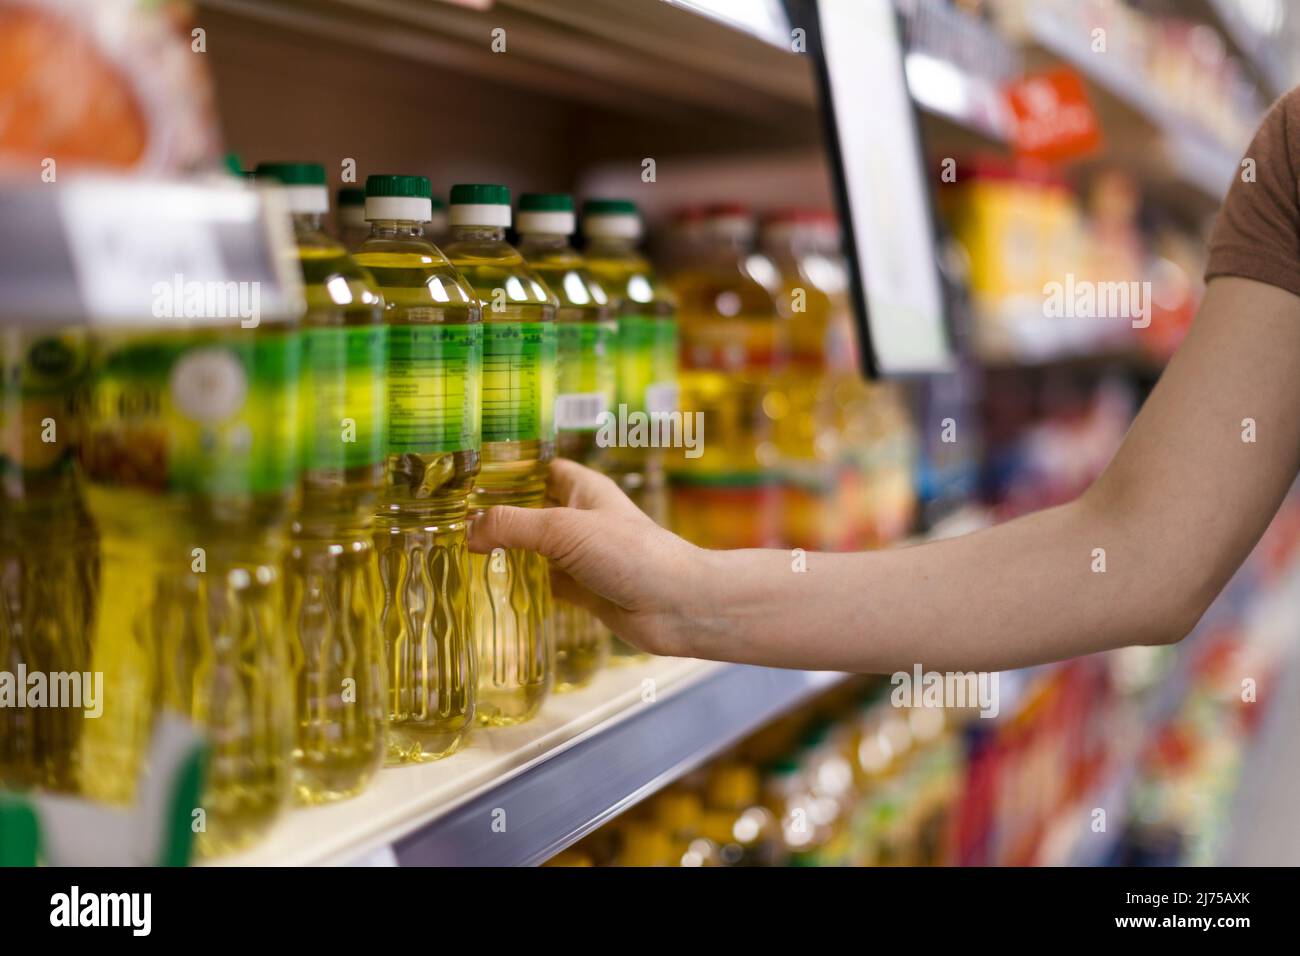 Woman buying cooking oil in supermarket, close-up Stock Photo